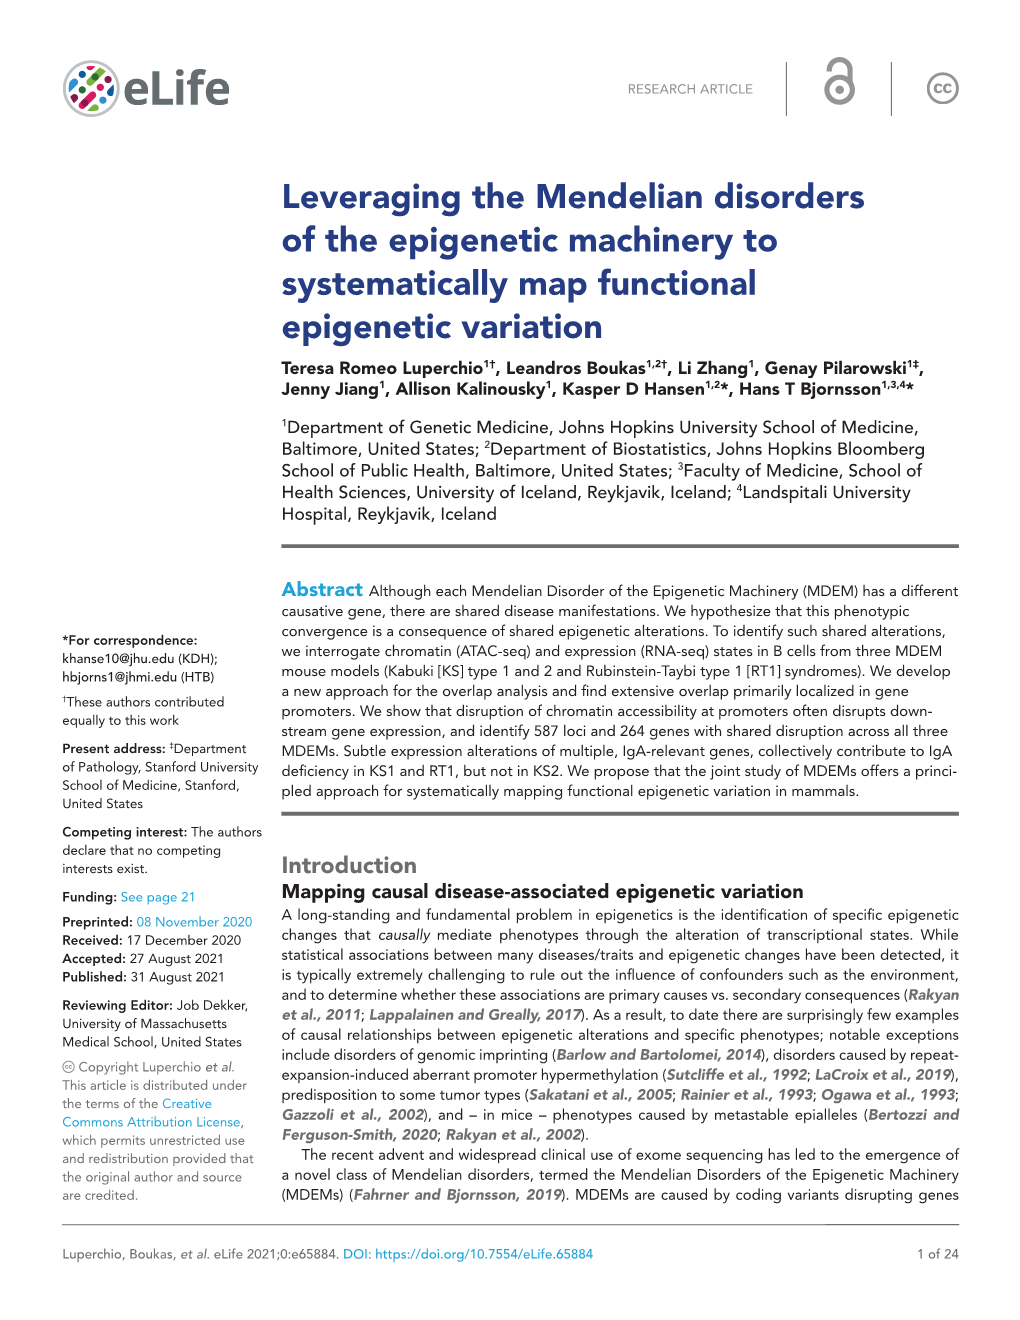 Leveraging the Mendelian Disorders of the Epigenetic Machinery